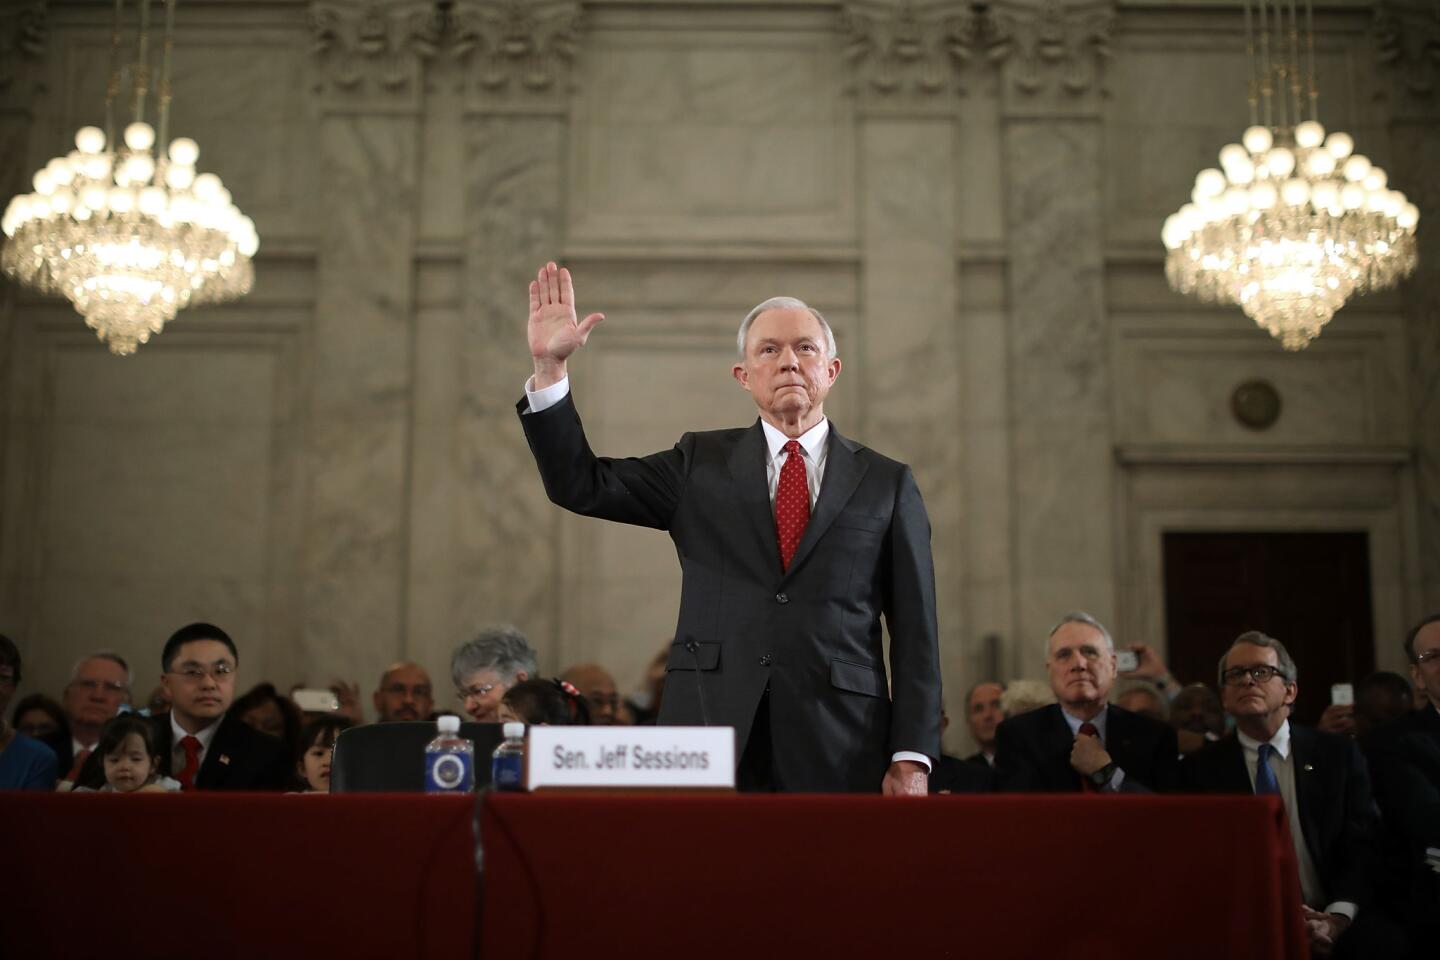 Sen. Jeff Sessions, R-Ala., is sworn in before the Senate Judiciary Committee during his confirmation hearing to be the U.S. attorney general Jan. 10, 2017.